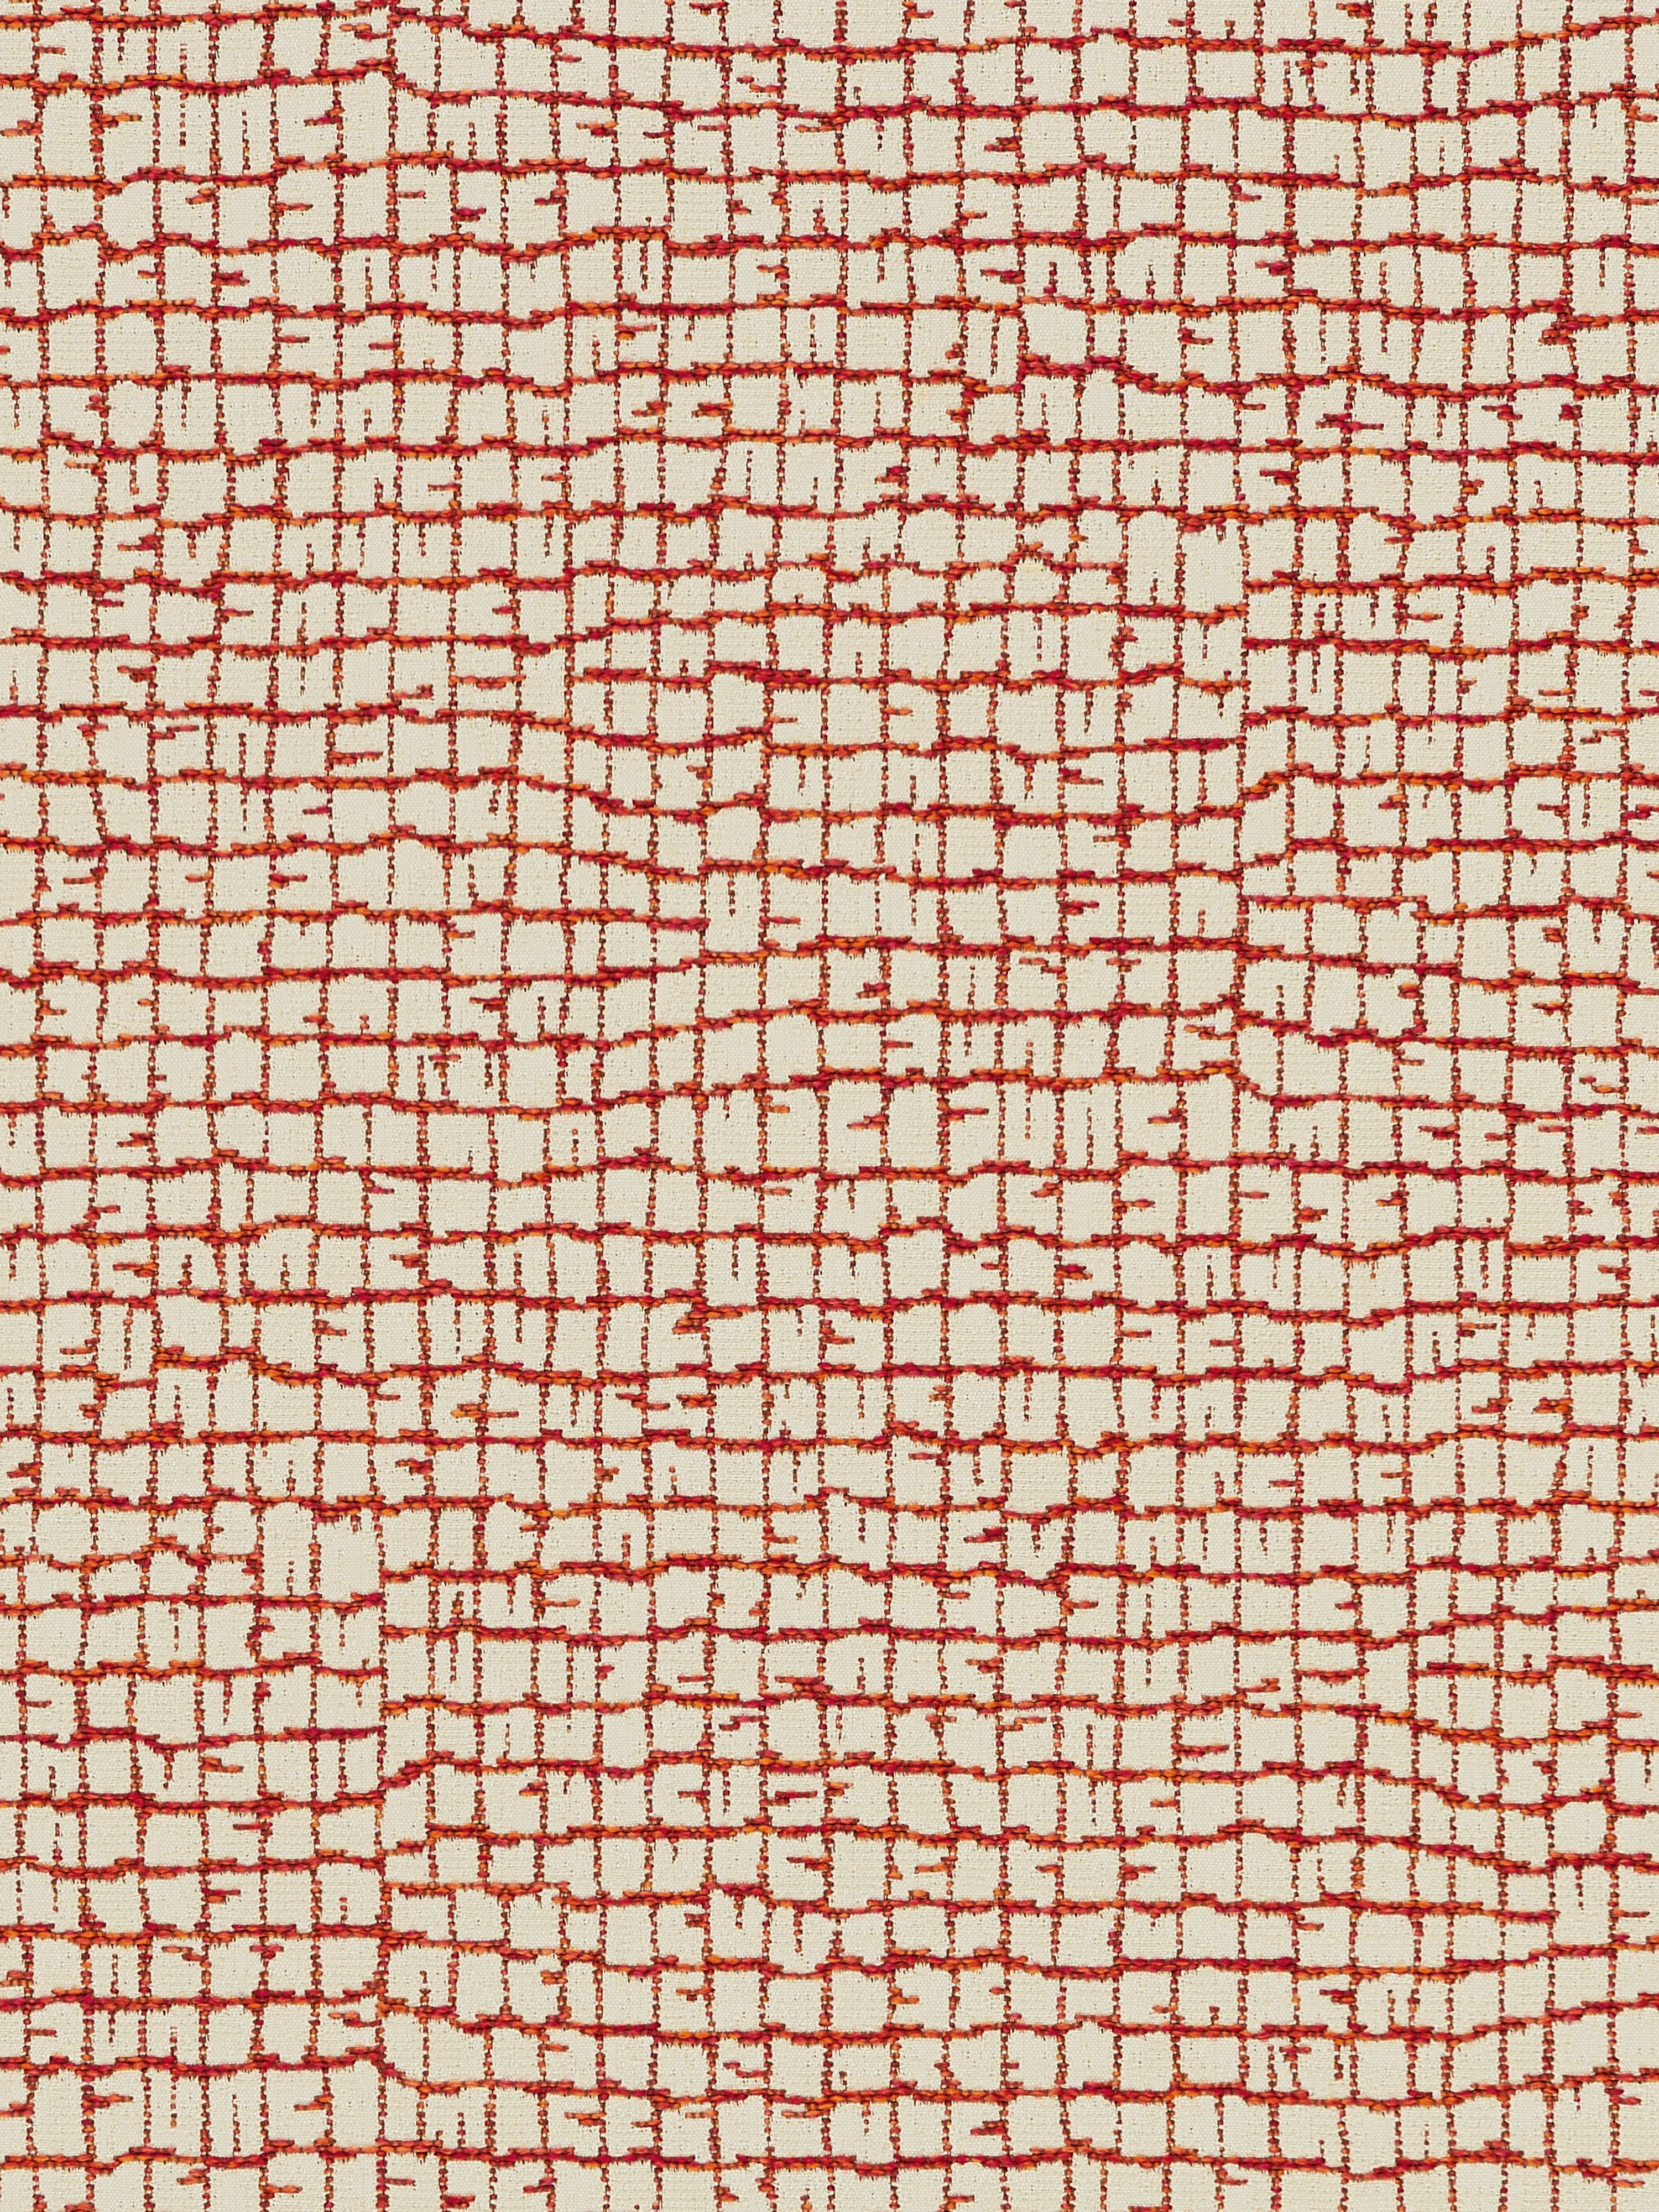 Troya Beach fabric in coral color - pattern number PO 0001TROY - by Scalamandre in the Old World Weavers collection